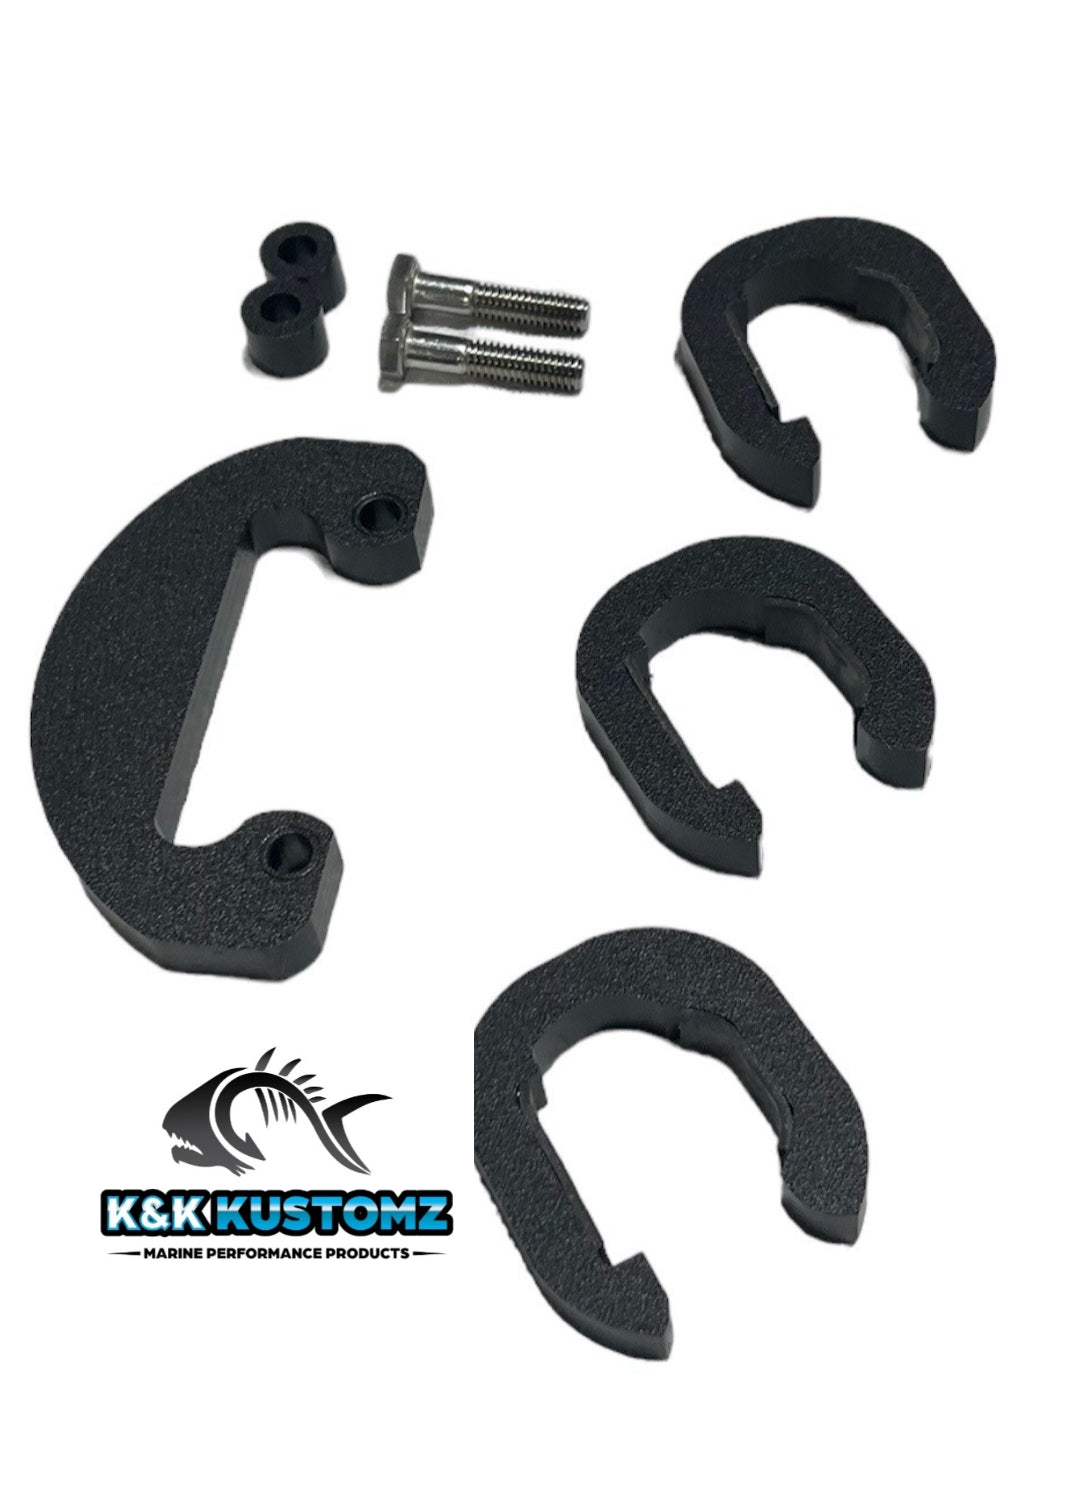 ULTREX QUEST TRANSDUCER CABLE CLIP AND KEEPER SET FROM K AND K KUSTOMZ